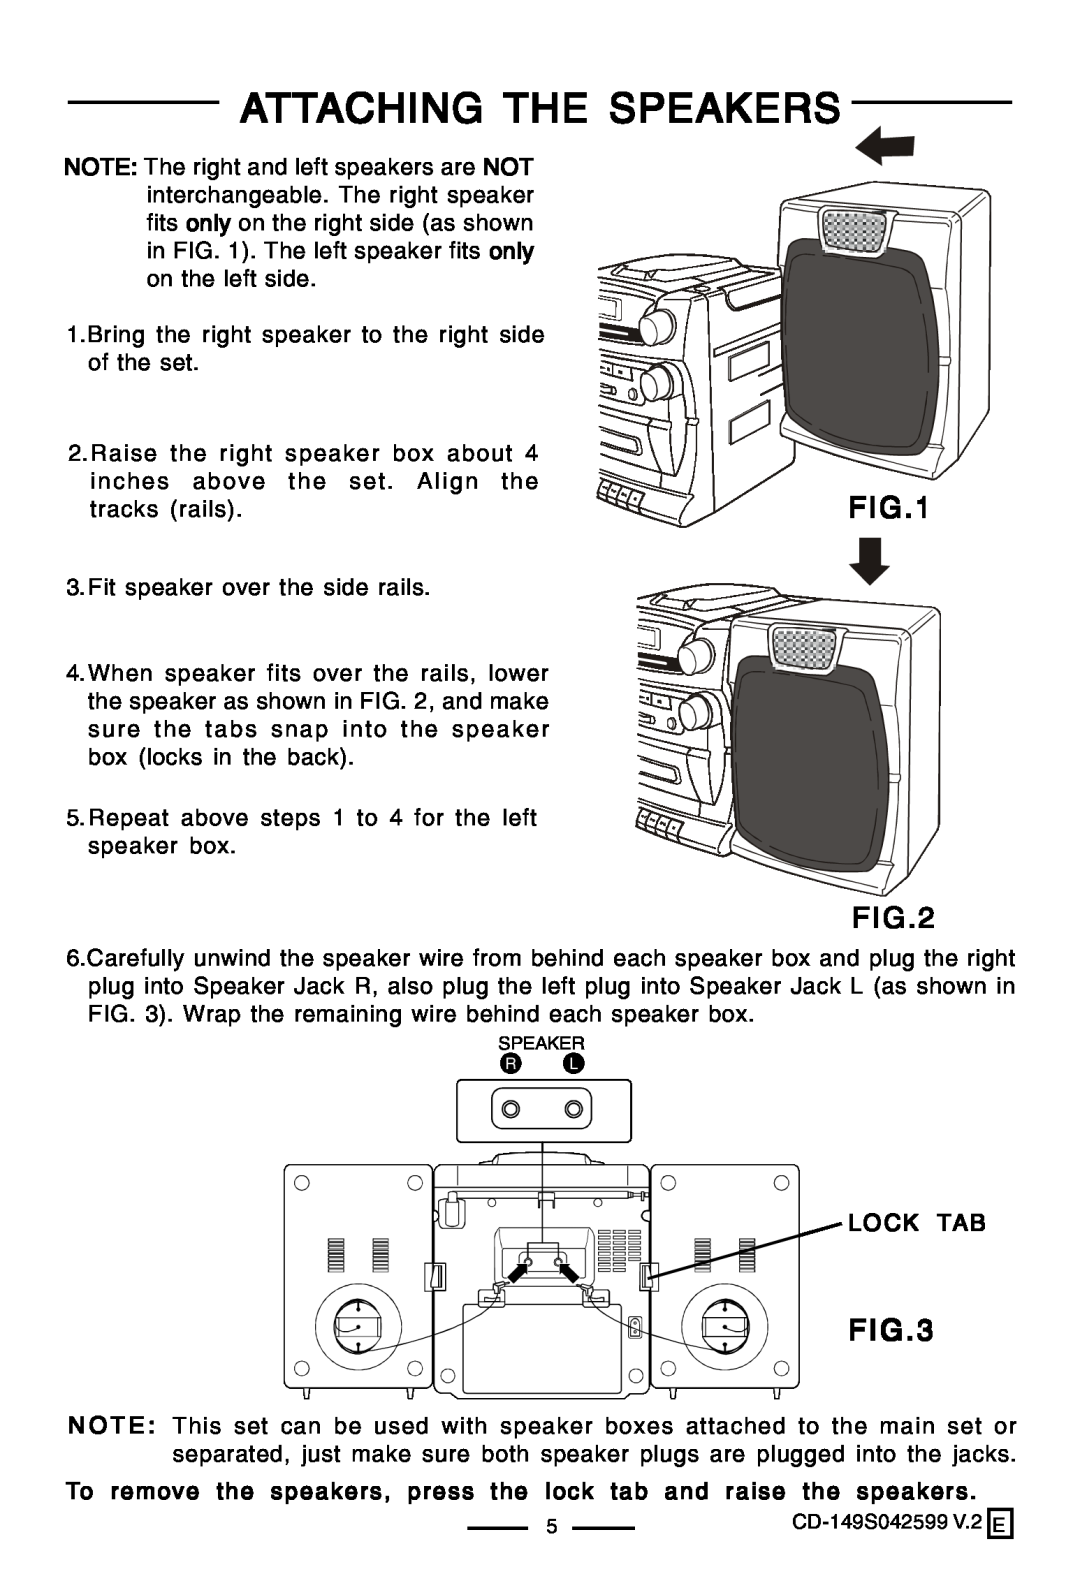 Lenoxx Electronics CD-149 operating instructions Attaching The Speakers, Lock Tab 